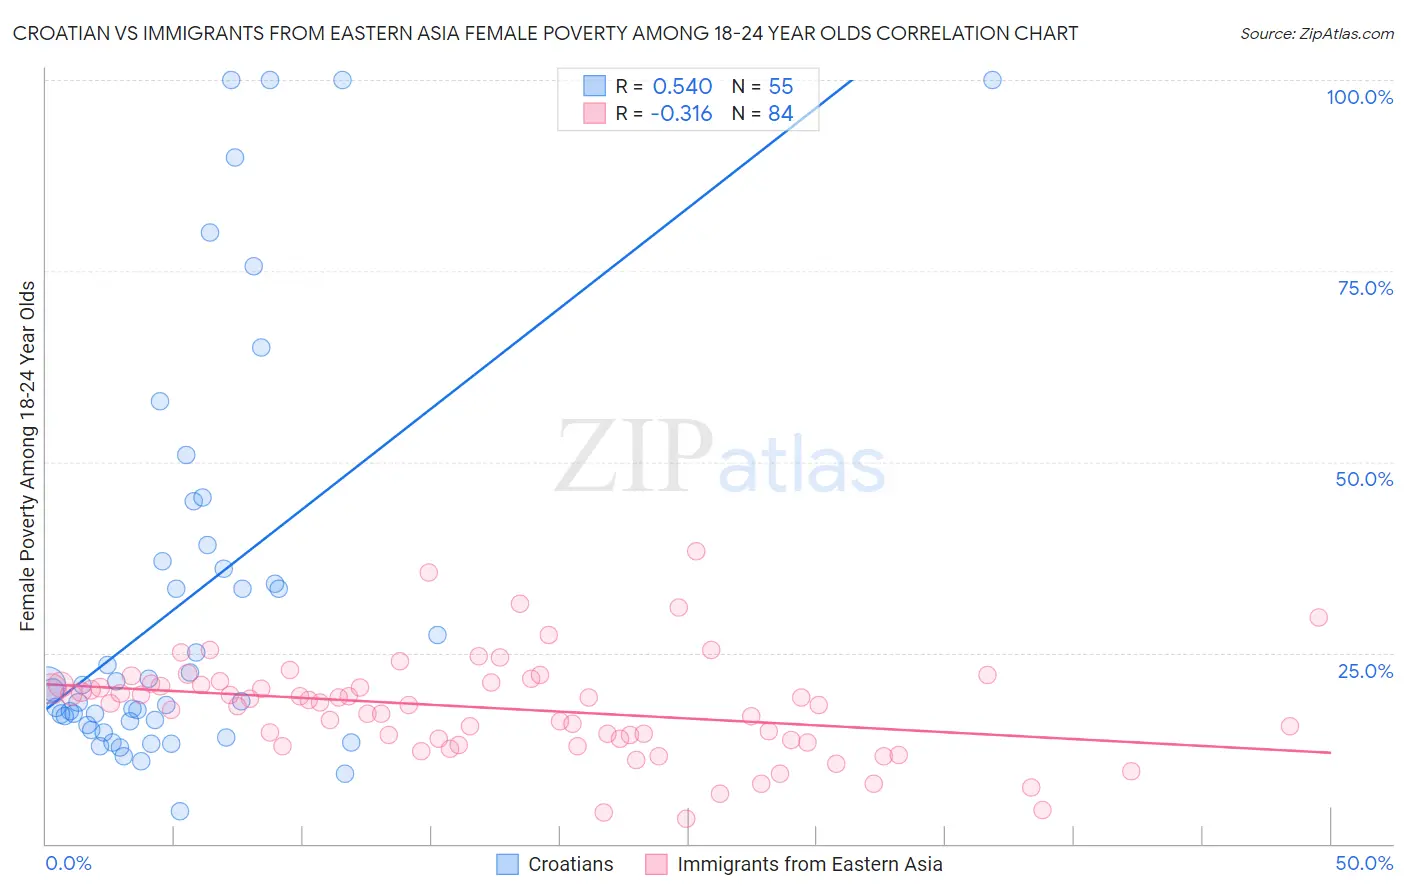 Croatian vs Immigrants from Eastern Asia Female Poverty Among 18-24 Year Olds